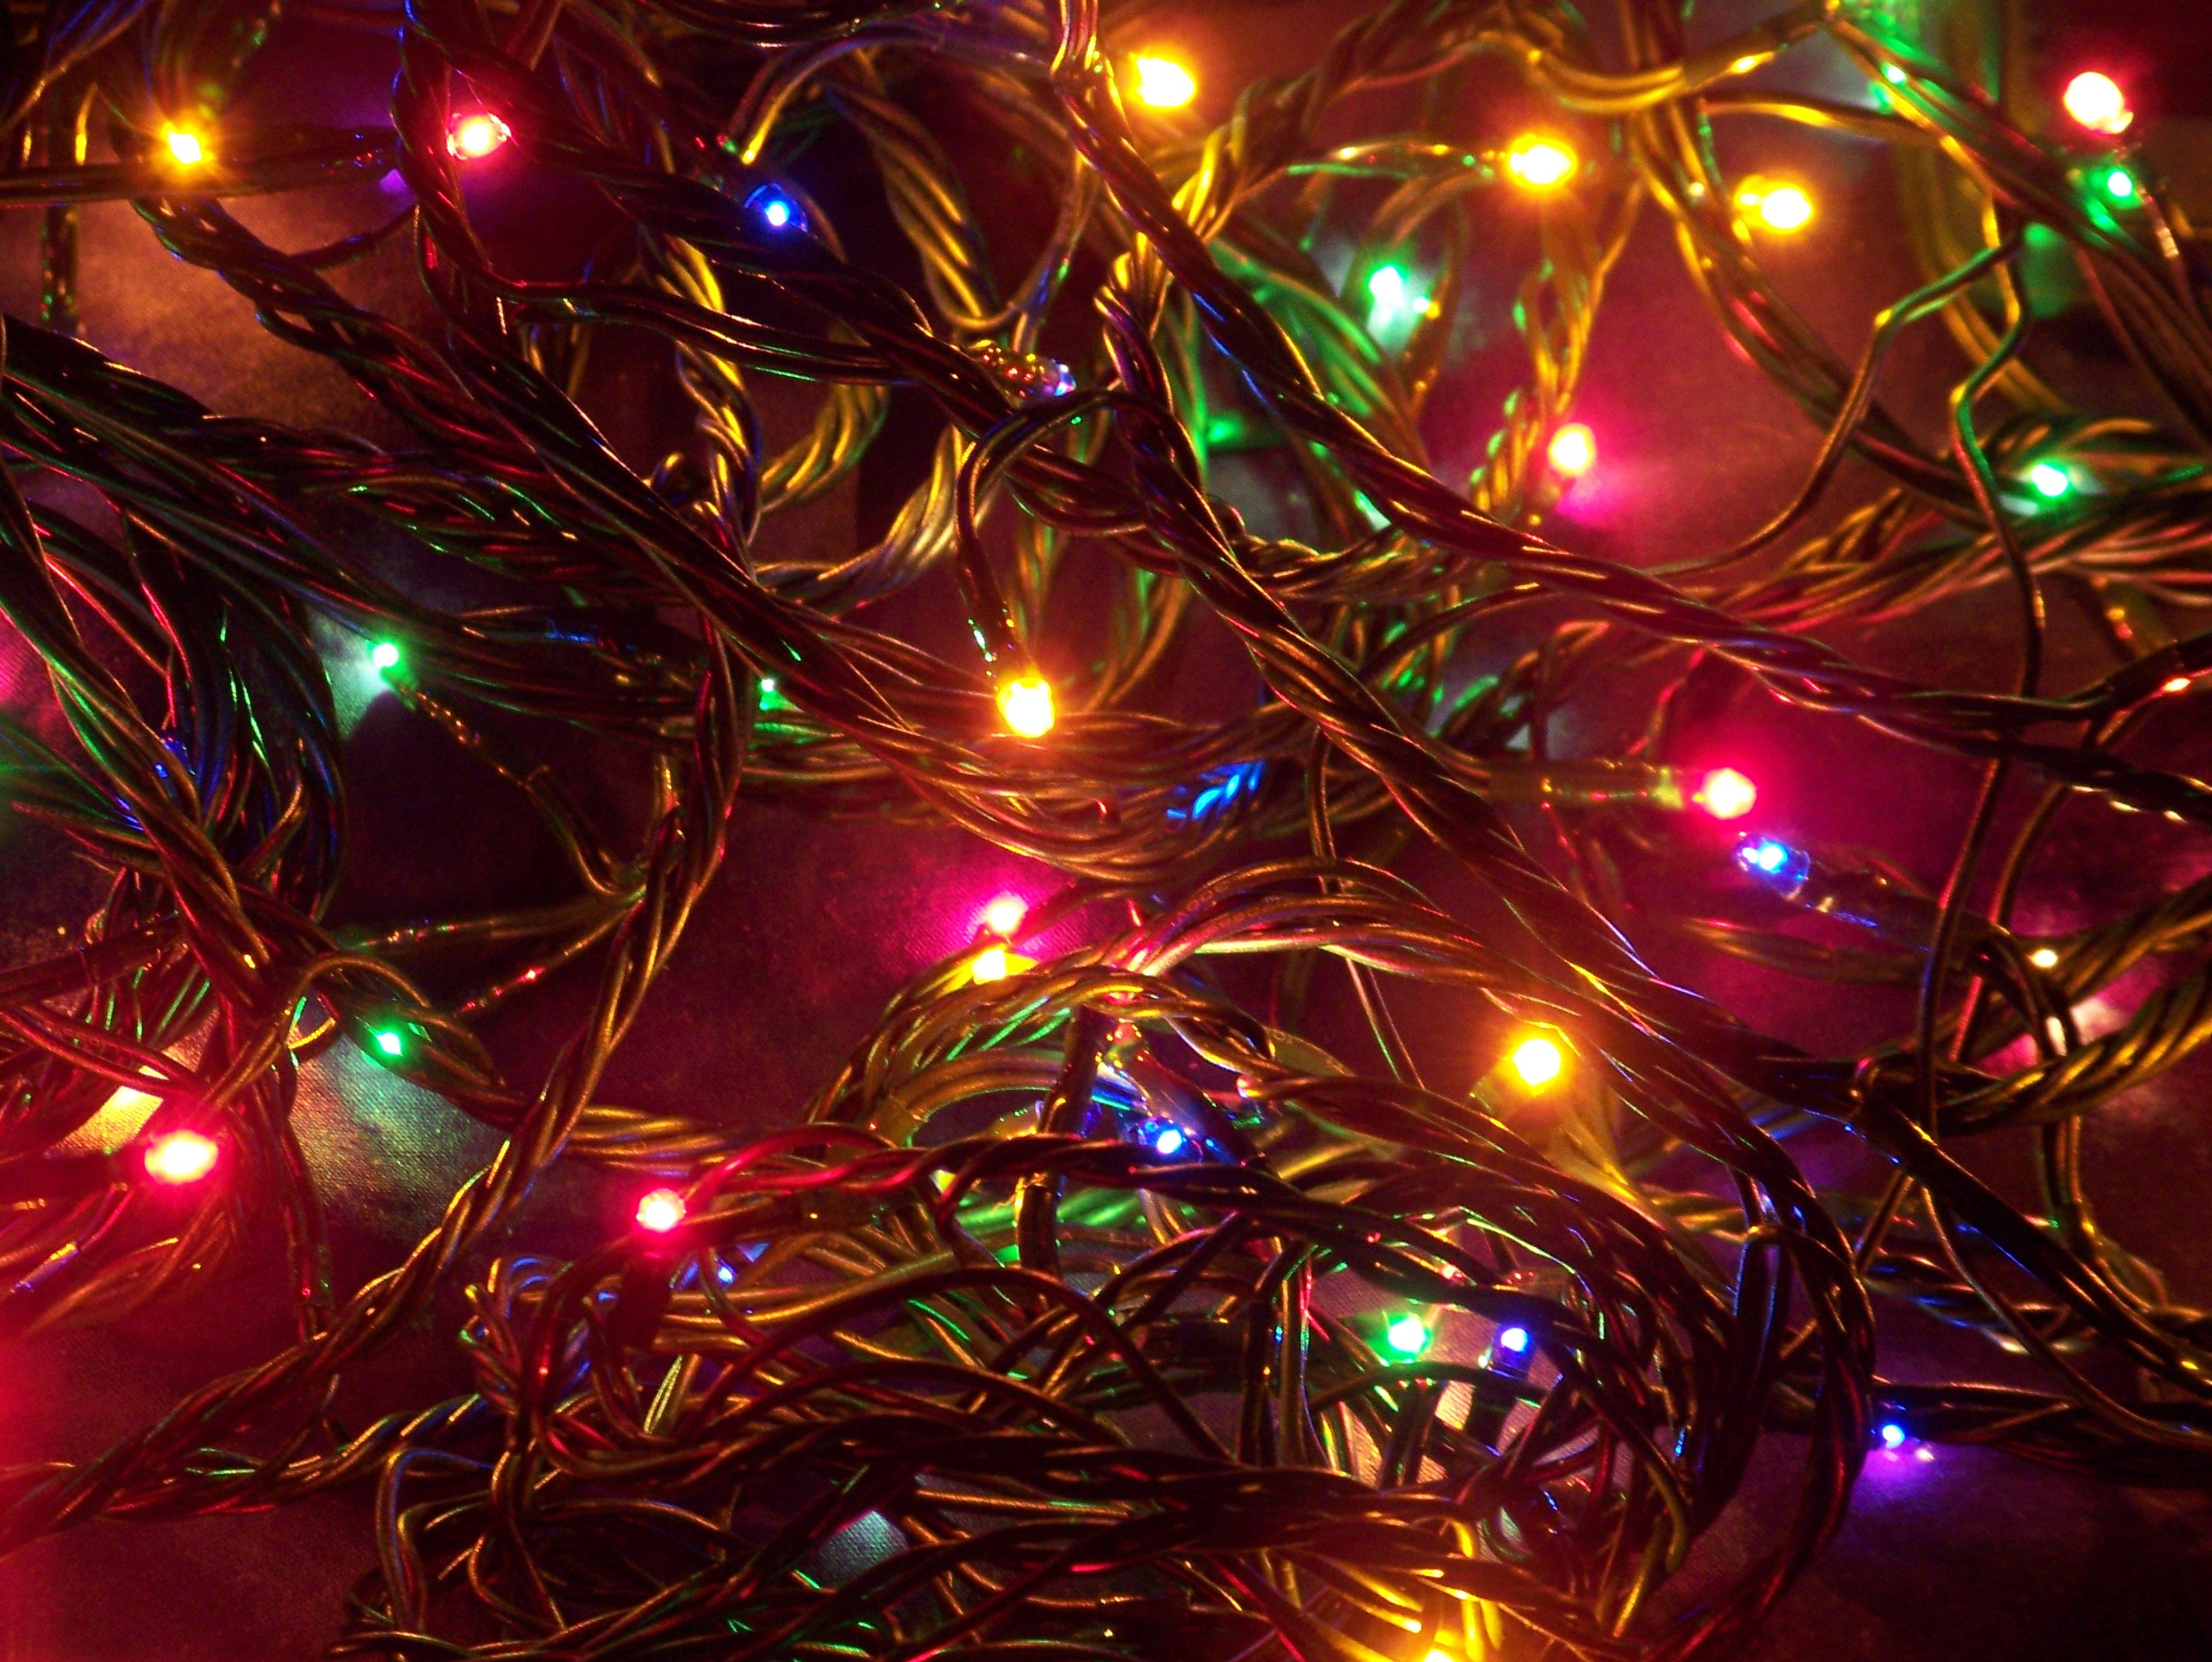 2832x2128 Find this Pin and more on christmas by melodystinnett5. Collection of  beautiful Christmas lights wallpapers.